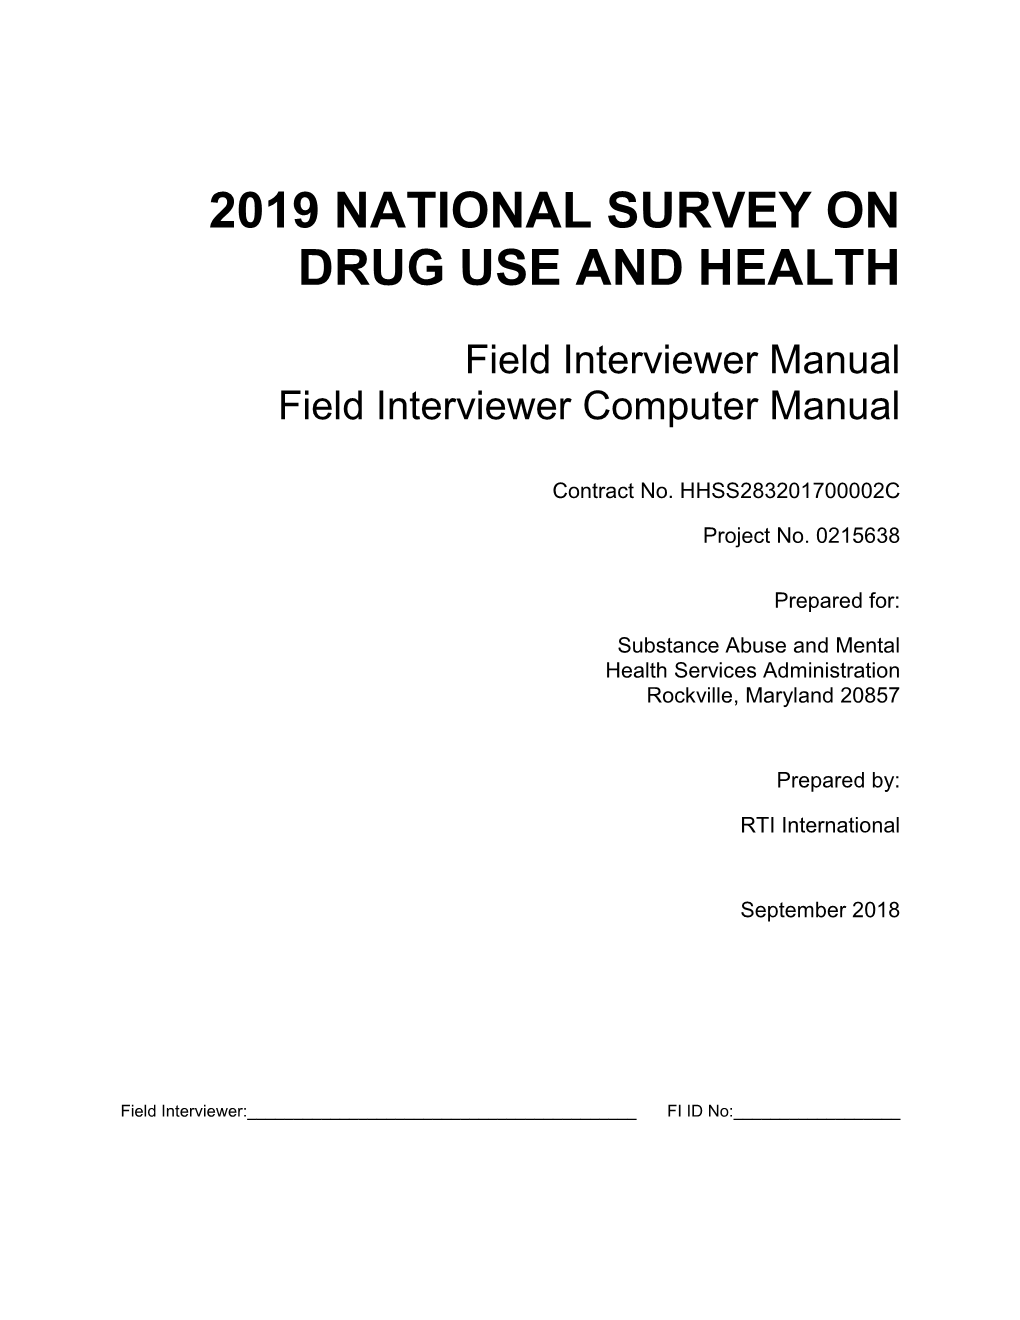 2019 NSDUH Field Interviewer Manual September 2018 I Table of Contents (Continued)